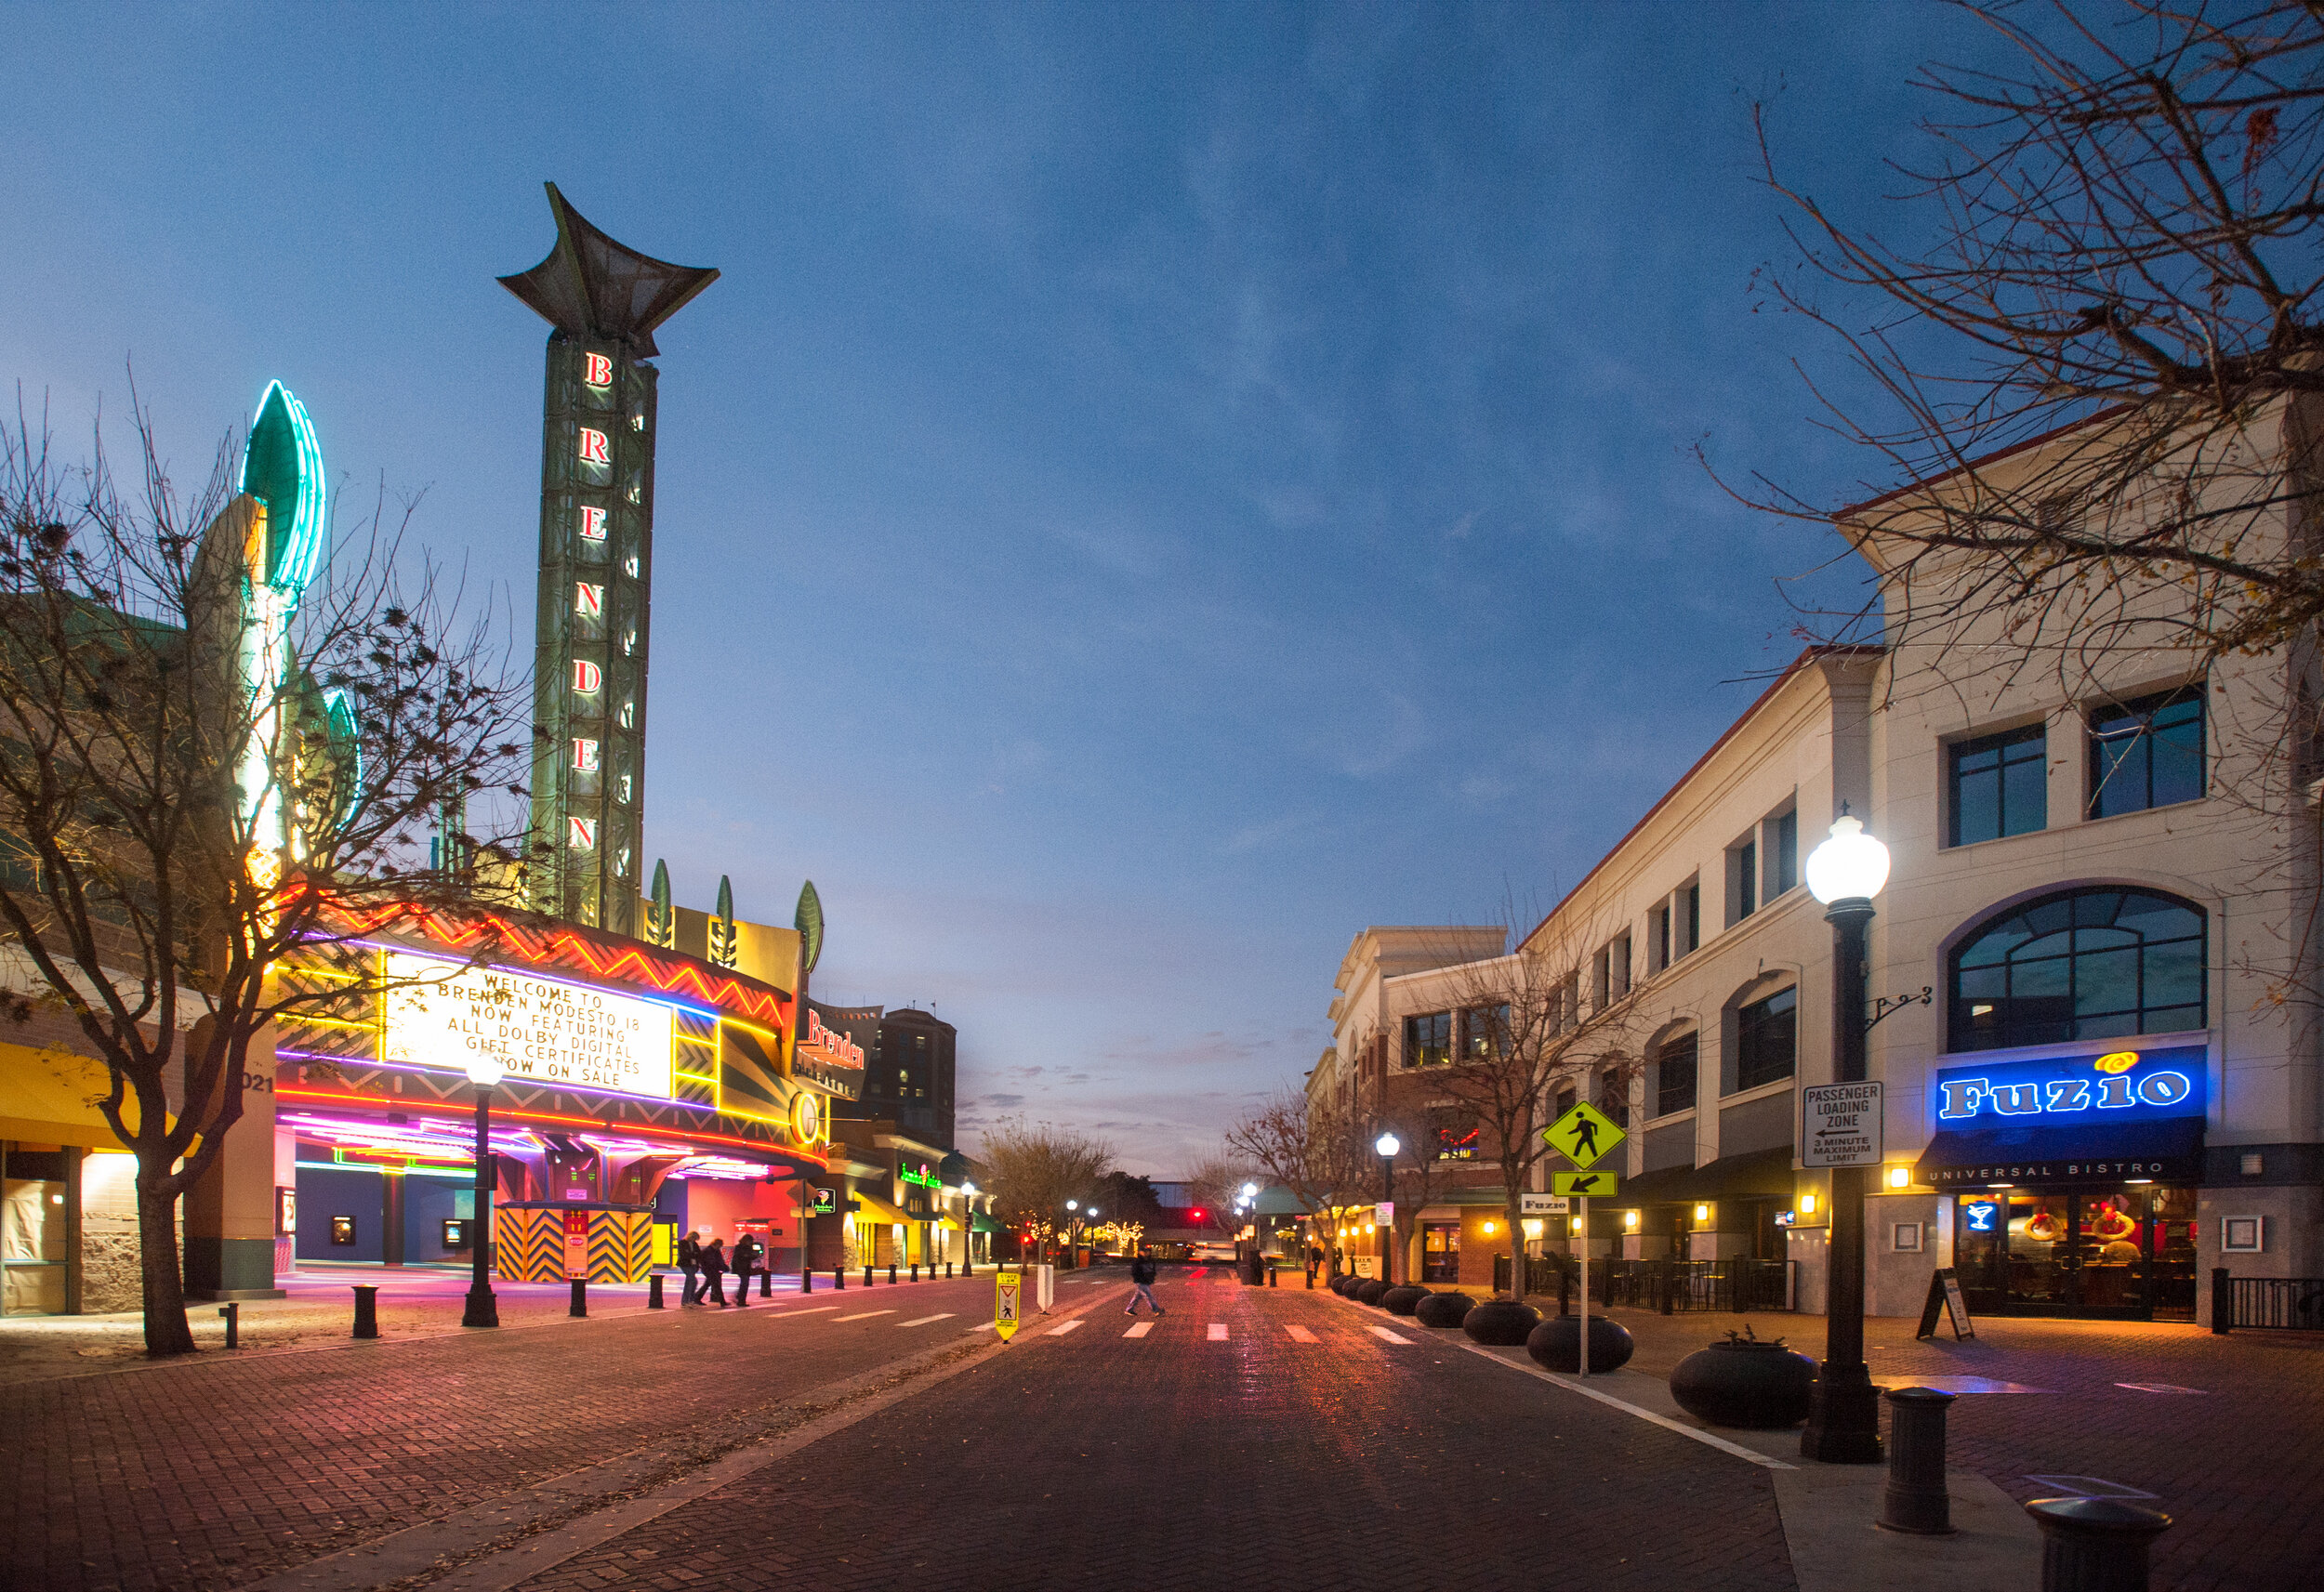 Modesto is a vibrant downtown